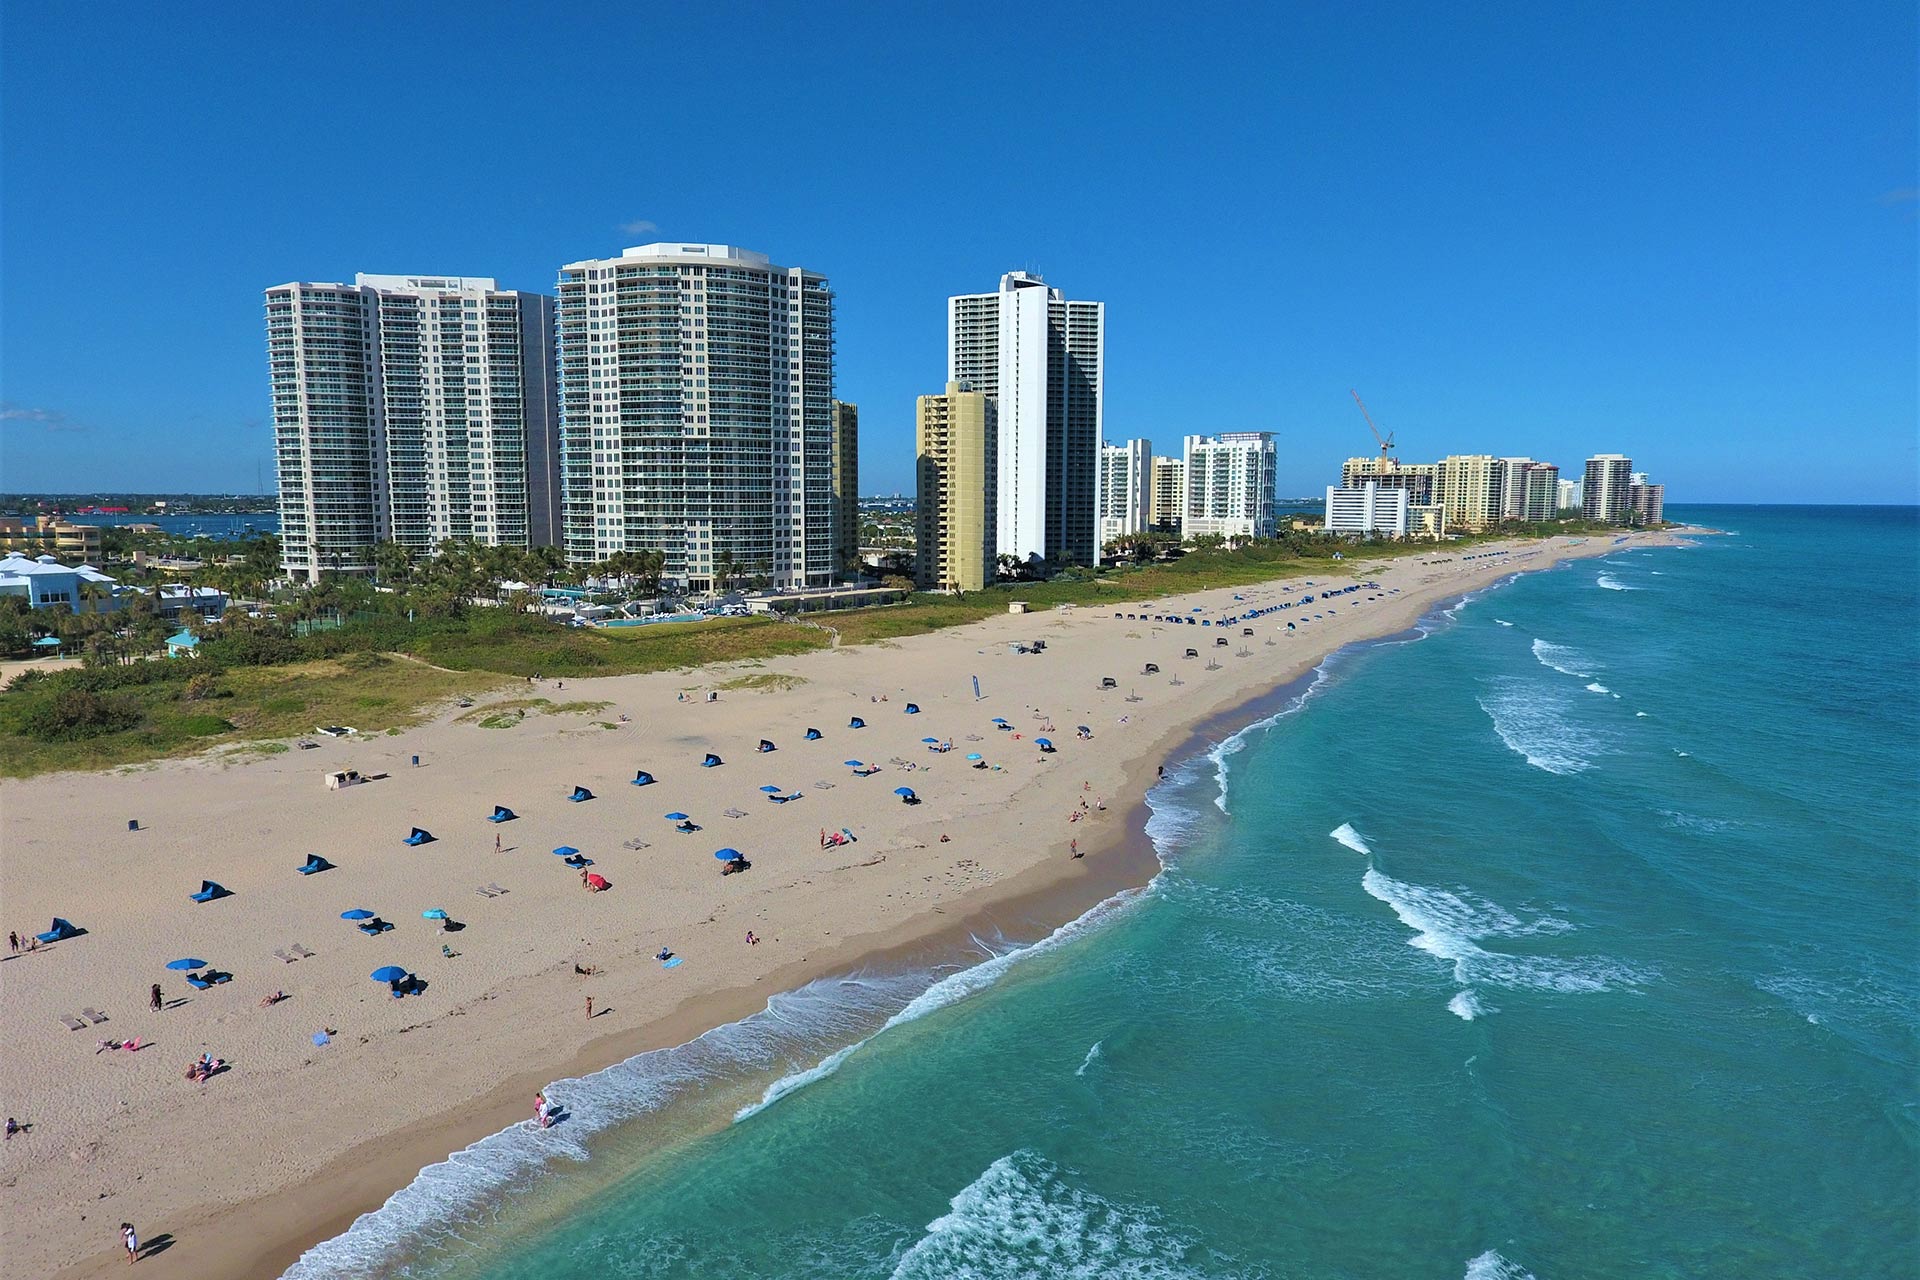 West Palm Beach, Florida; Photo Courtesy of Victor Setting/Shutterstock.com